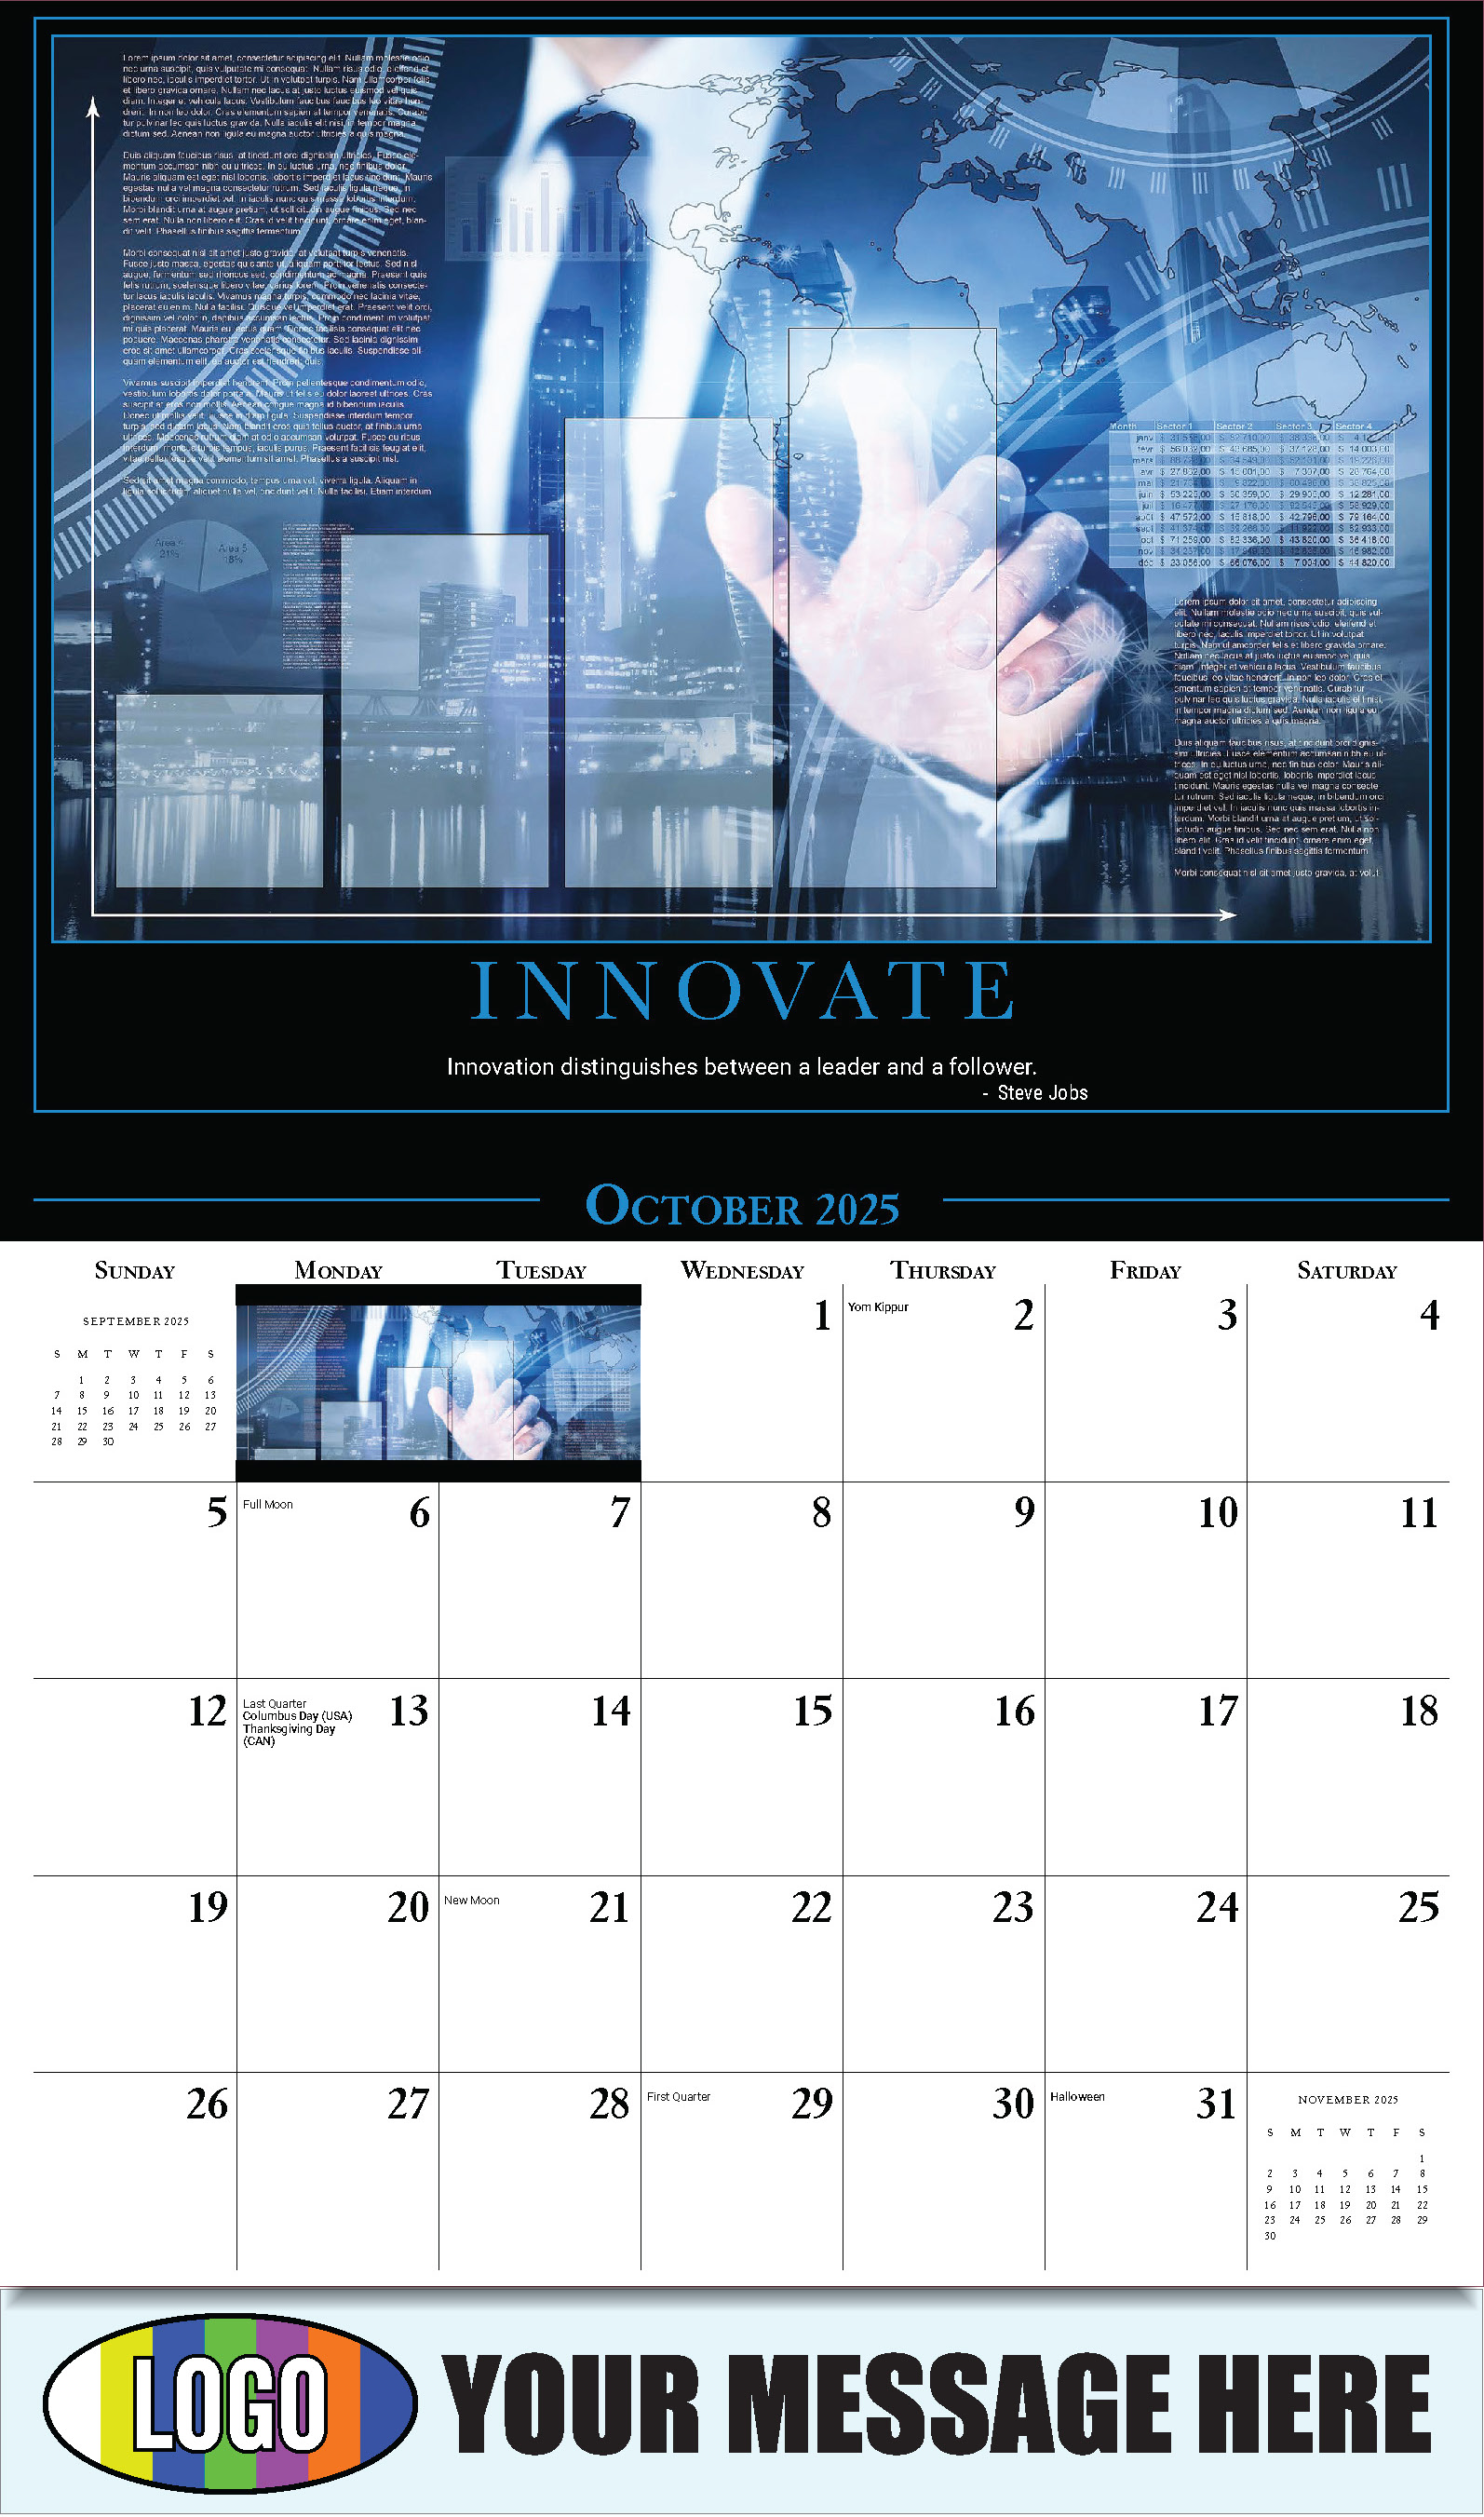 Motivational Quotes 2025 Business Promo Wall Calendar - October